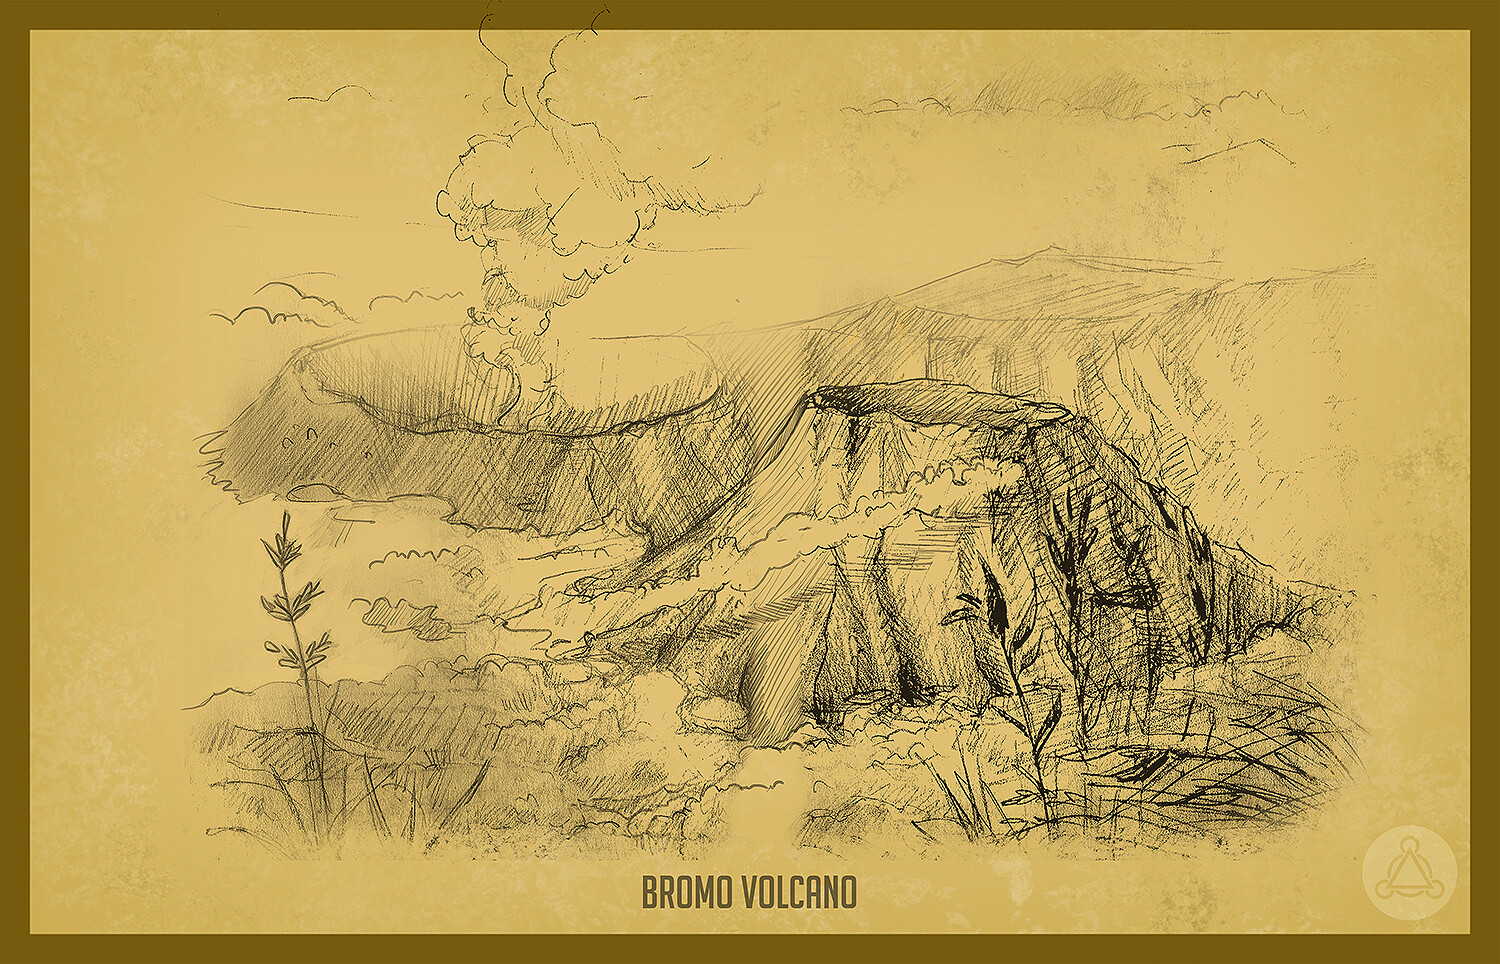 sketching a smoldering volcano is an experience